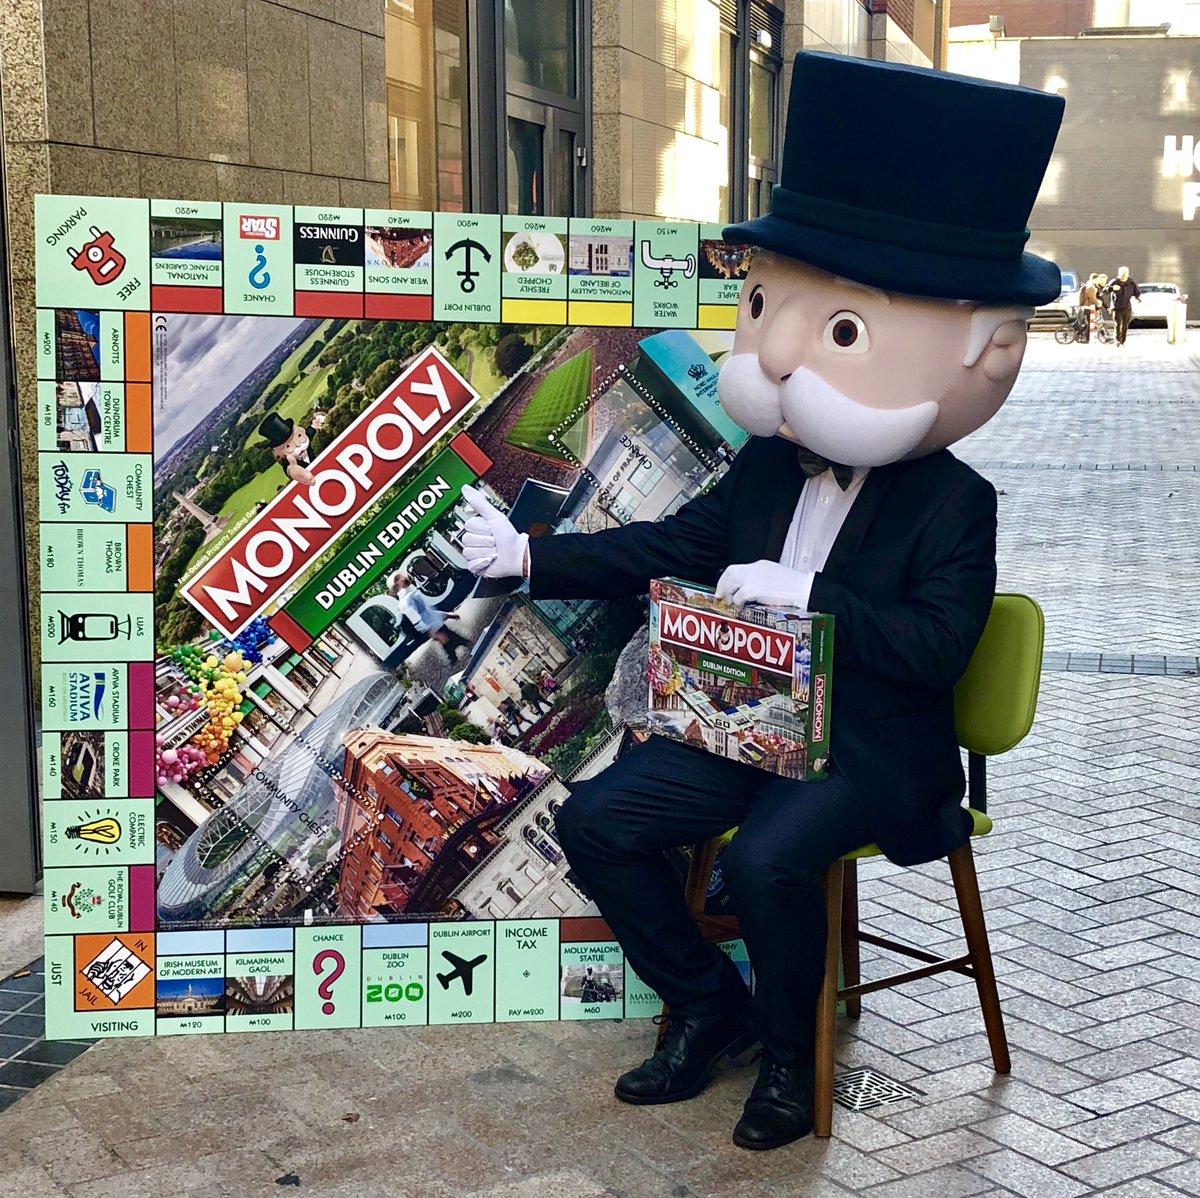 DCU rolls with it on new Monopoly Dublin board game